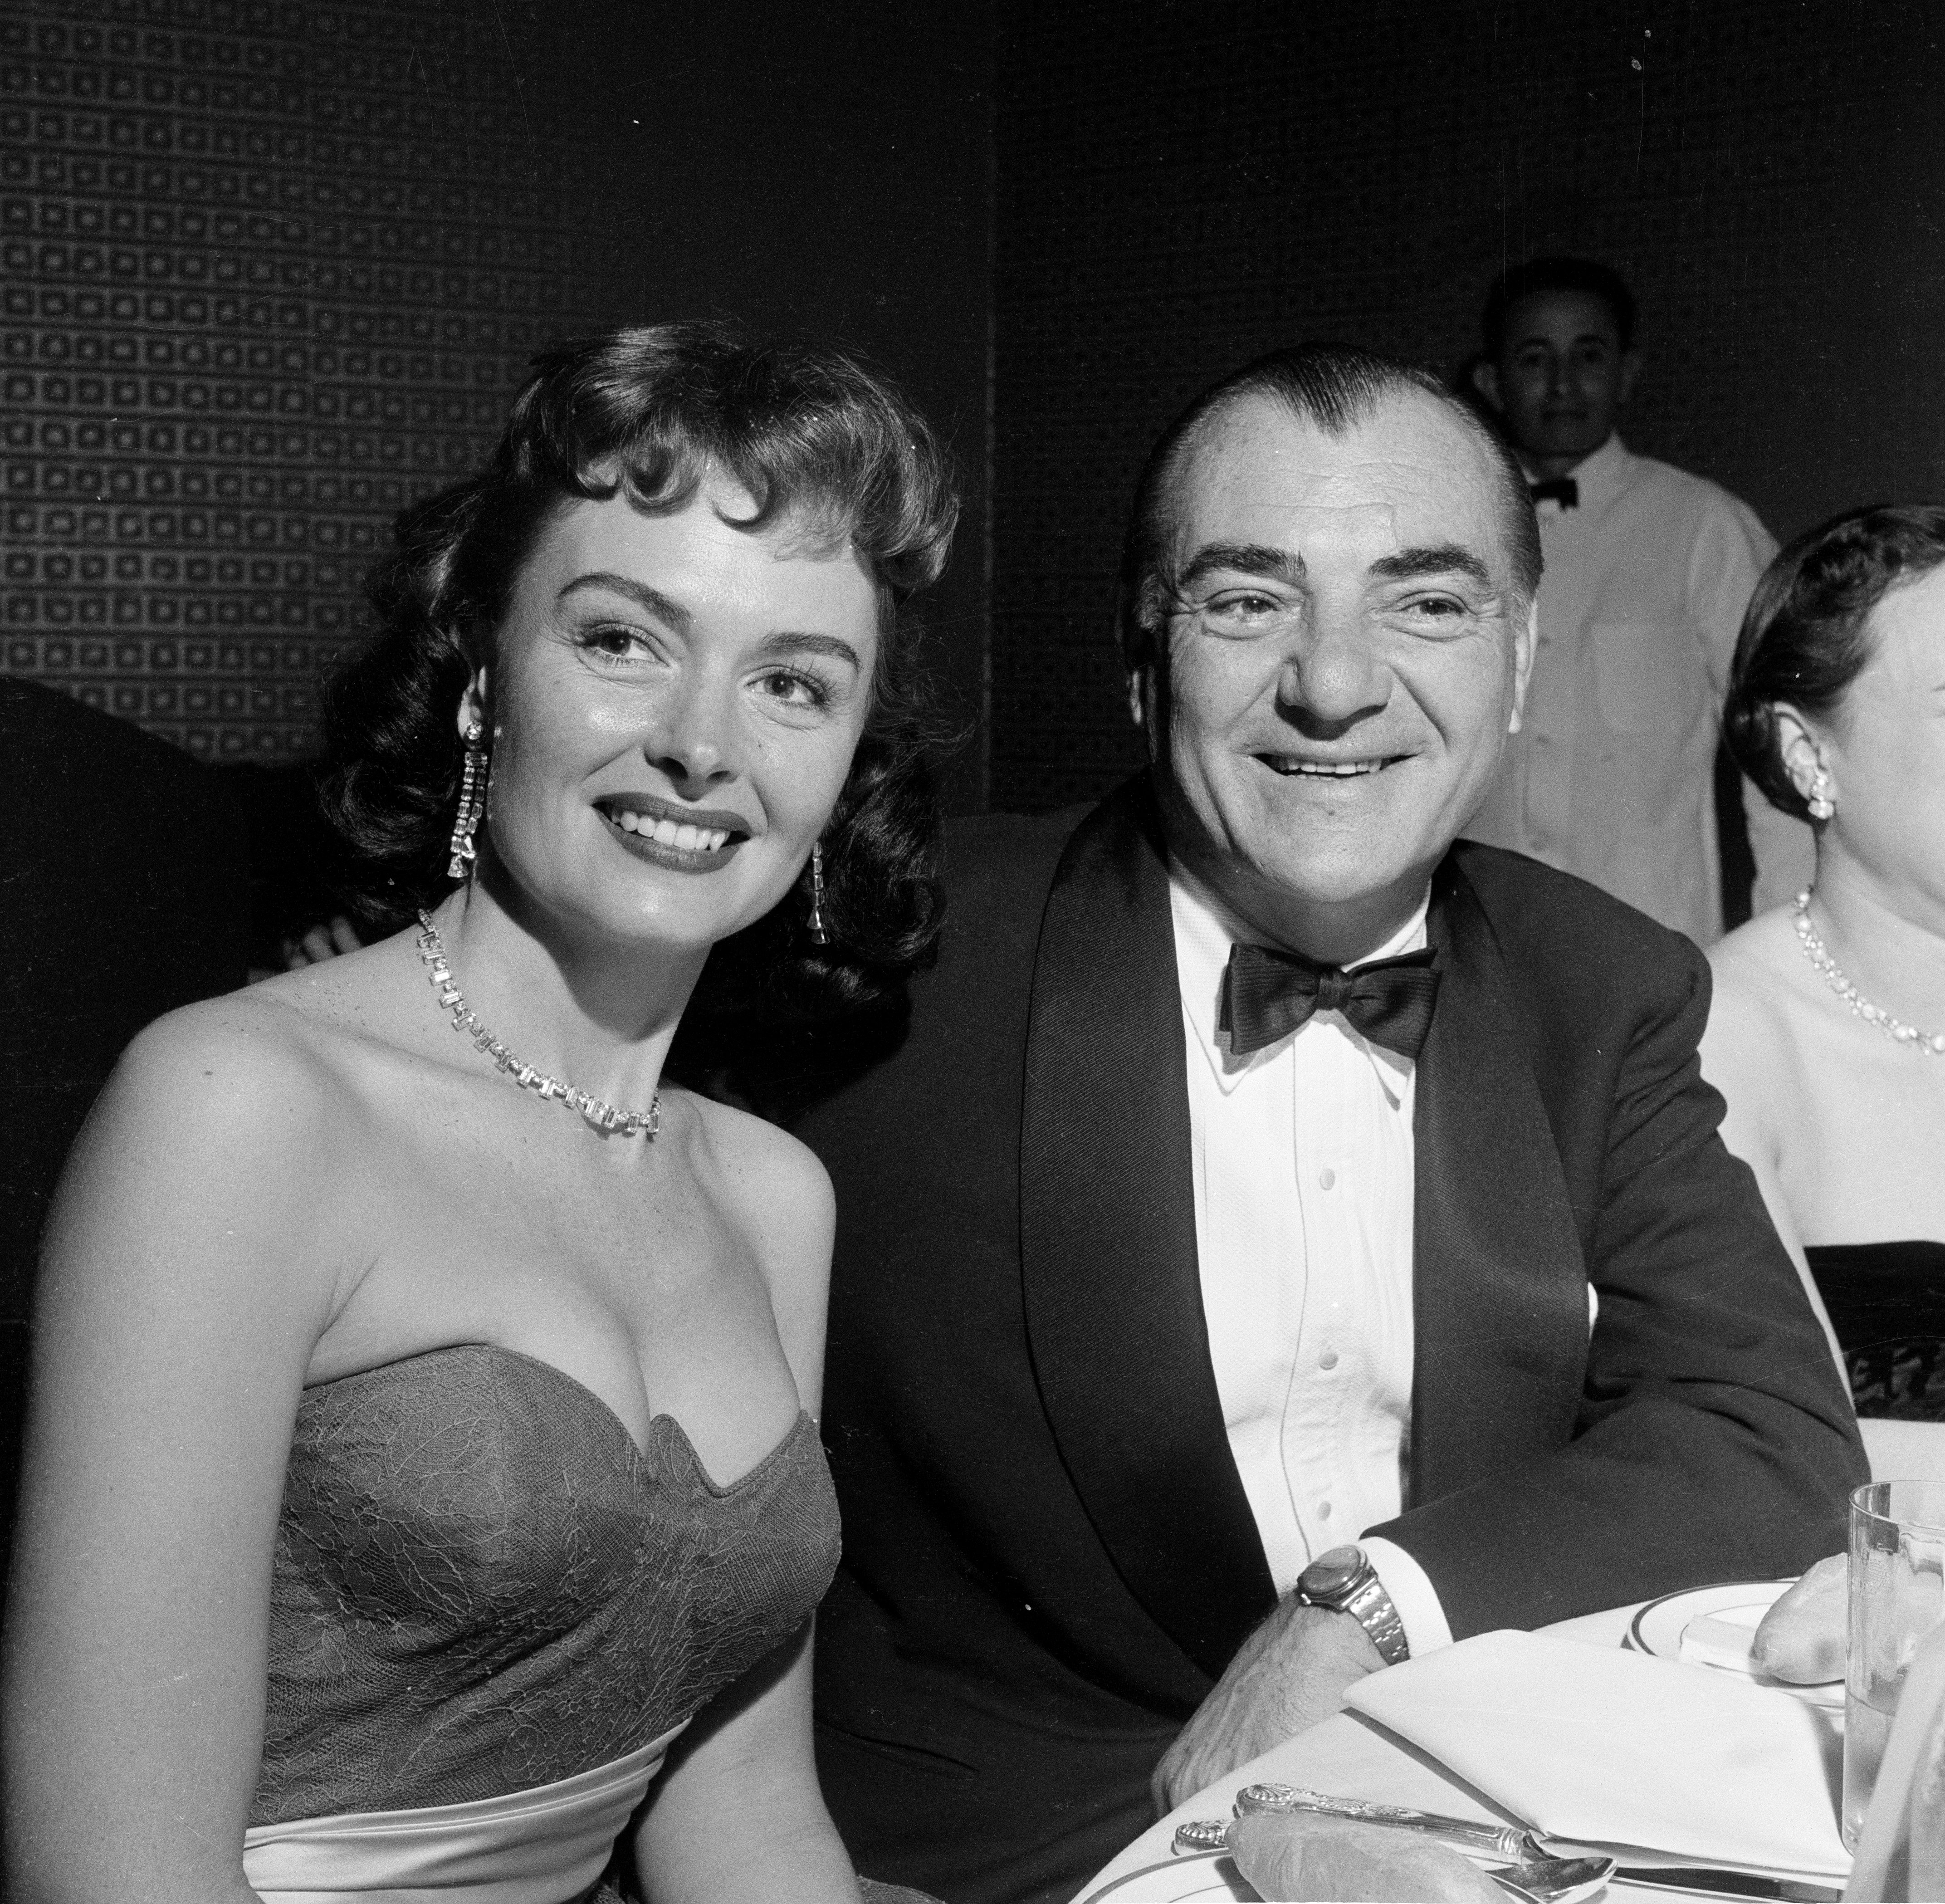 Actress Donna Reed poses with her husband Tony Owen during the Academy Award in Los Angeles, California, on March 25, 1954, | Source: Getty Images